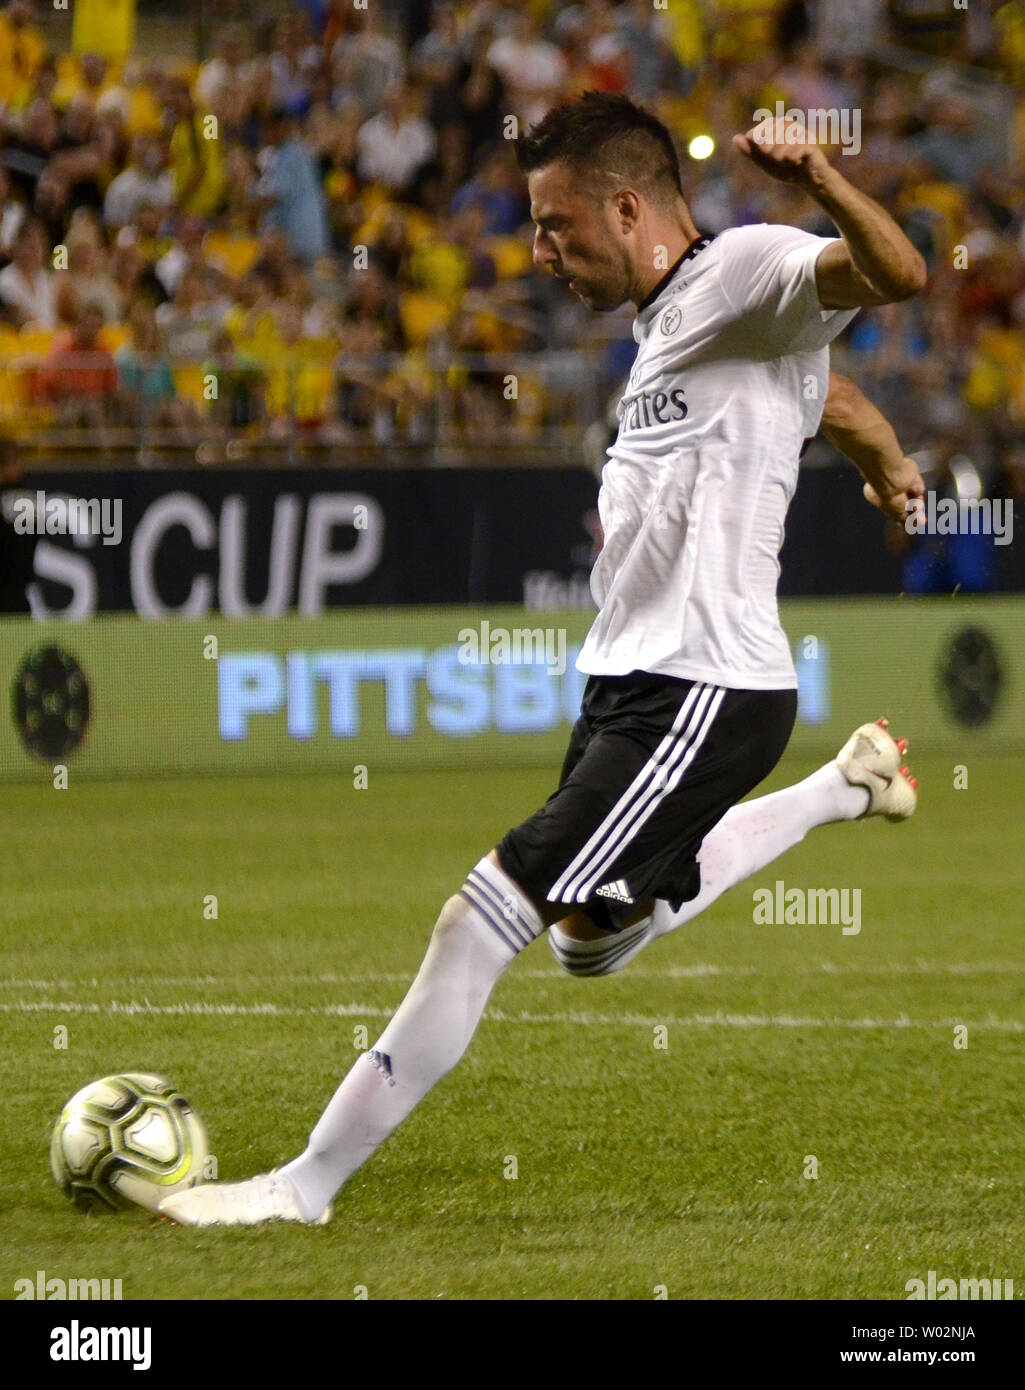 Benfica midfielder Andreas Samaris (22) misses during the penalty shots shootout against Borussia Dortmund at the 2018 International Champions Cup match at Heinz Field in Pittsburgh on July 25, 2018. Benfica wins 4-3 on penalties after a 2-2 tie.  Photo by Archie Carpenter/UPI Stock Photo